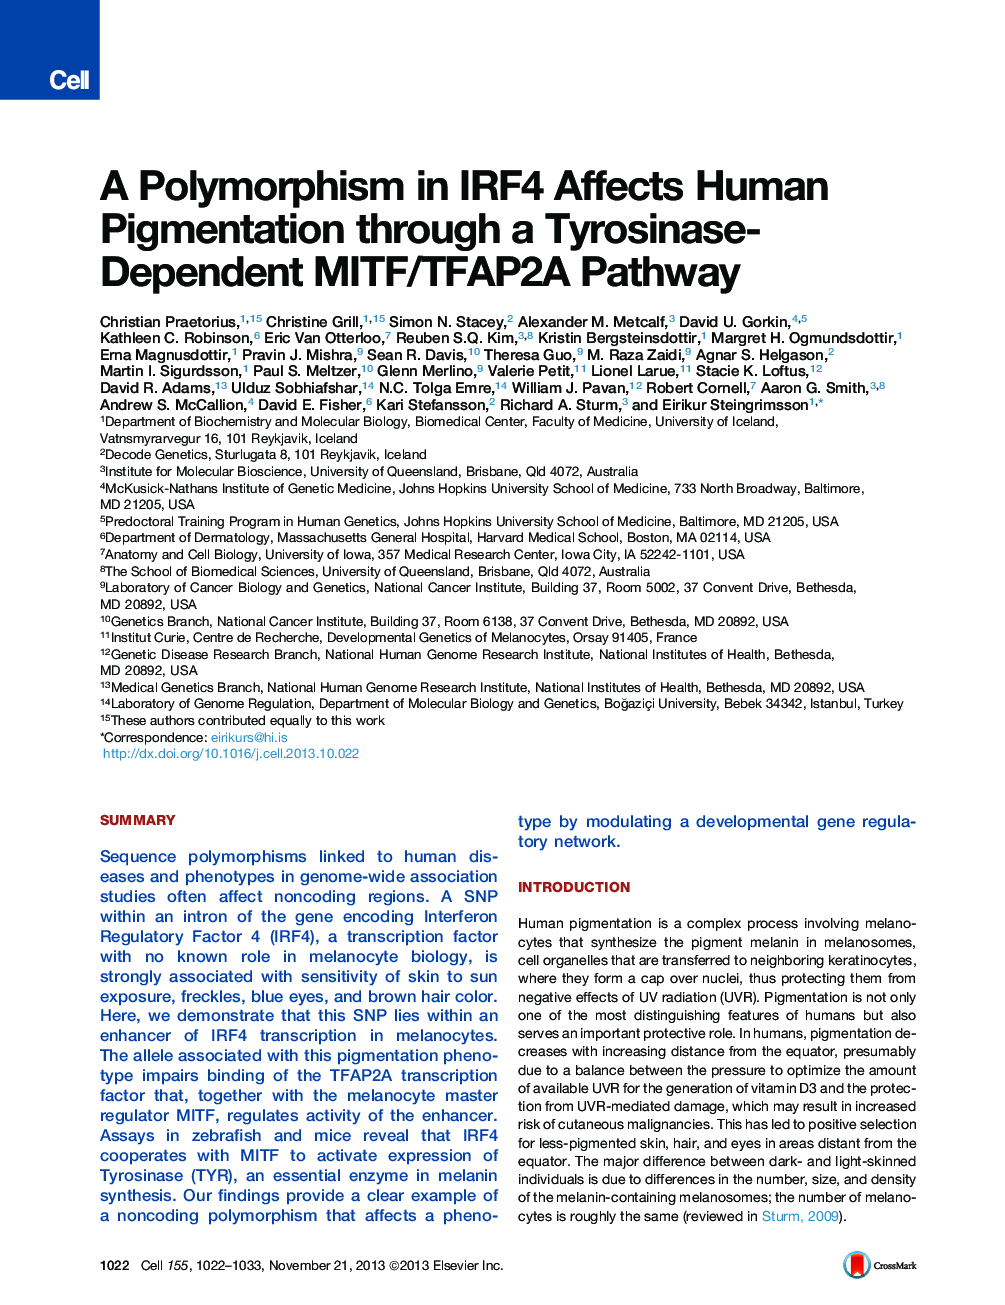 A Polymorphism in IRF4 Affects Human Pigmentation through a Tyrosinase-Dependent MITF/TFAP2A Pathway